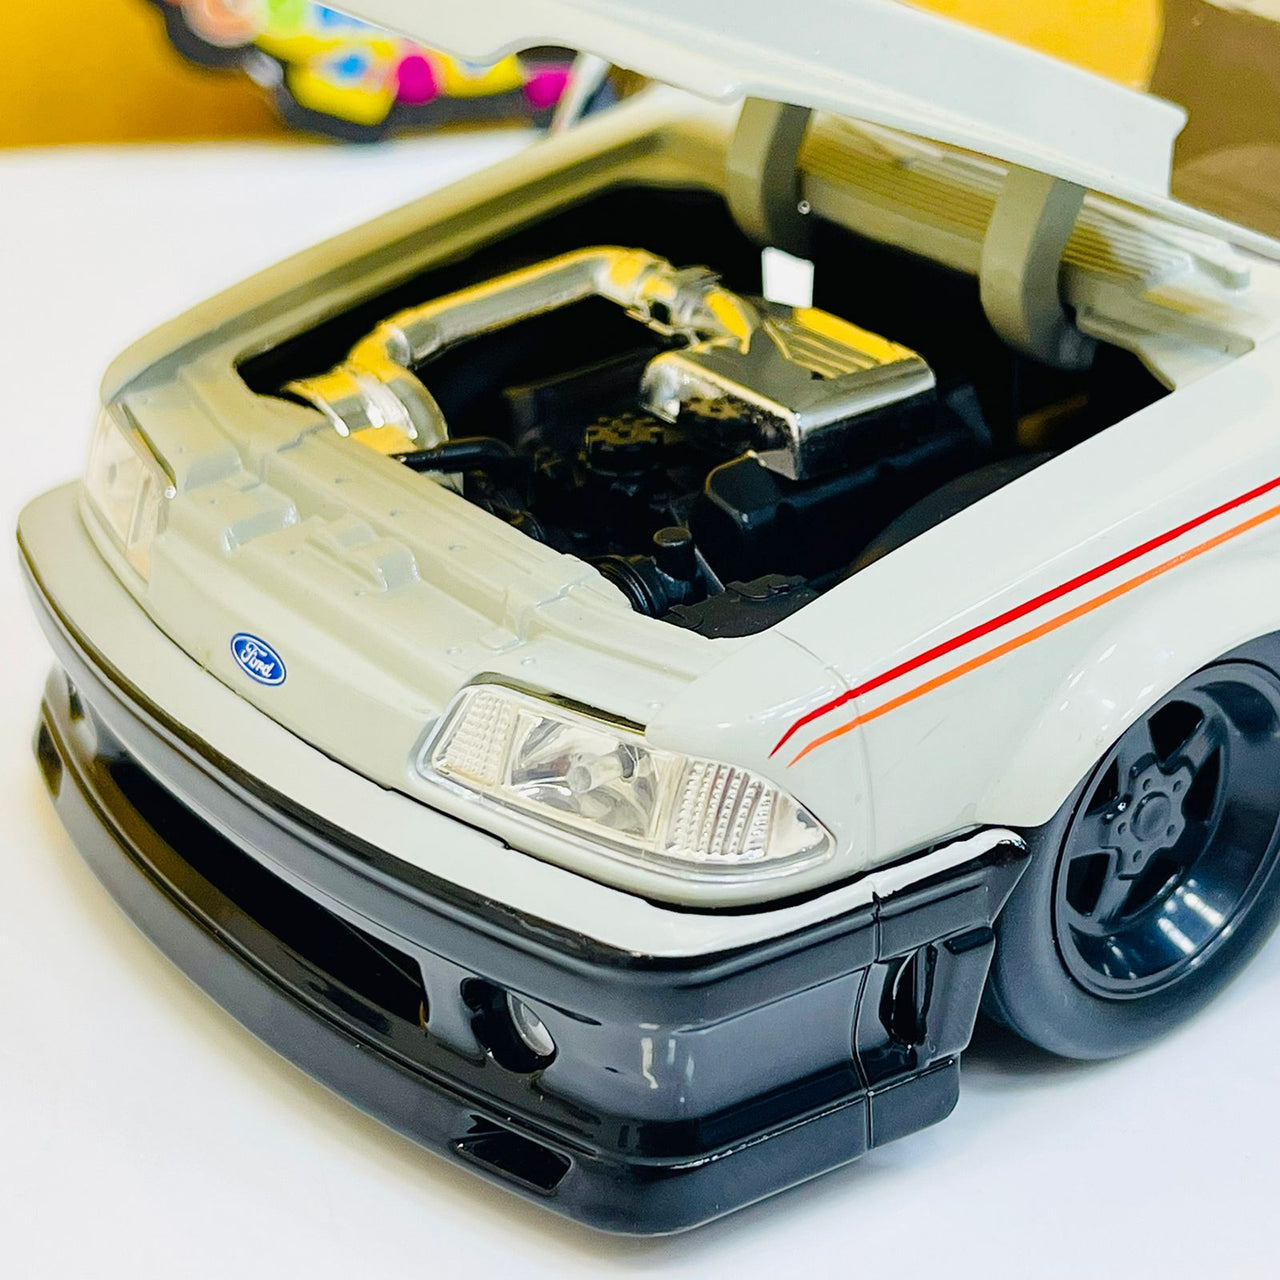 1:24 1989 Ford Mustang GT Bigtime Muscle by JADA